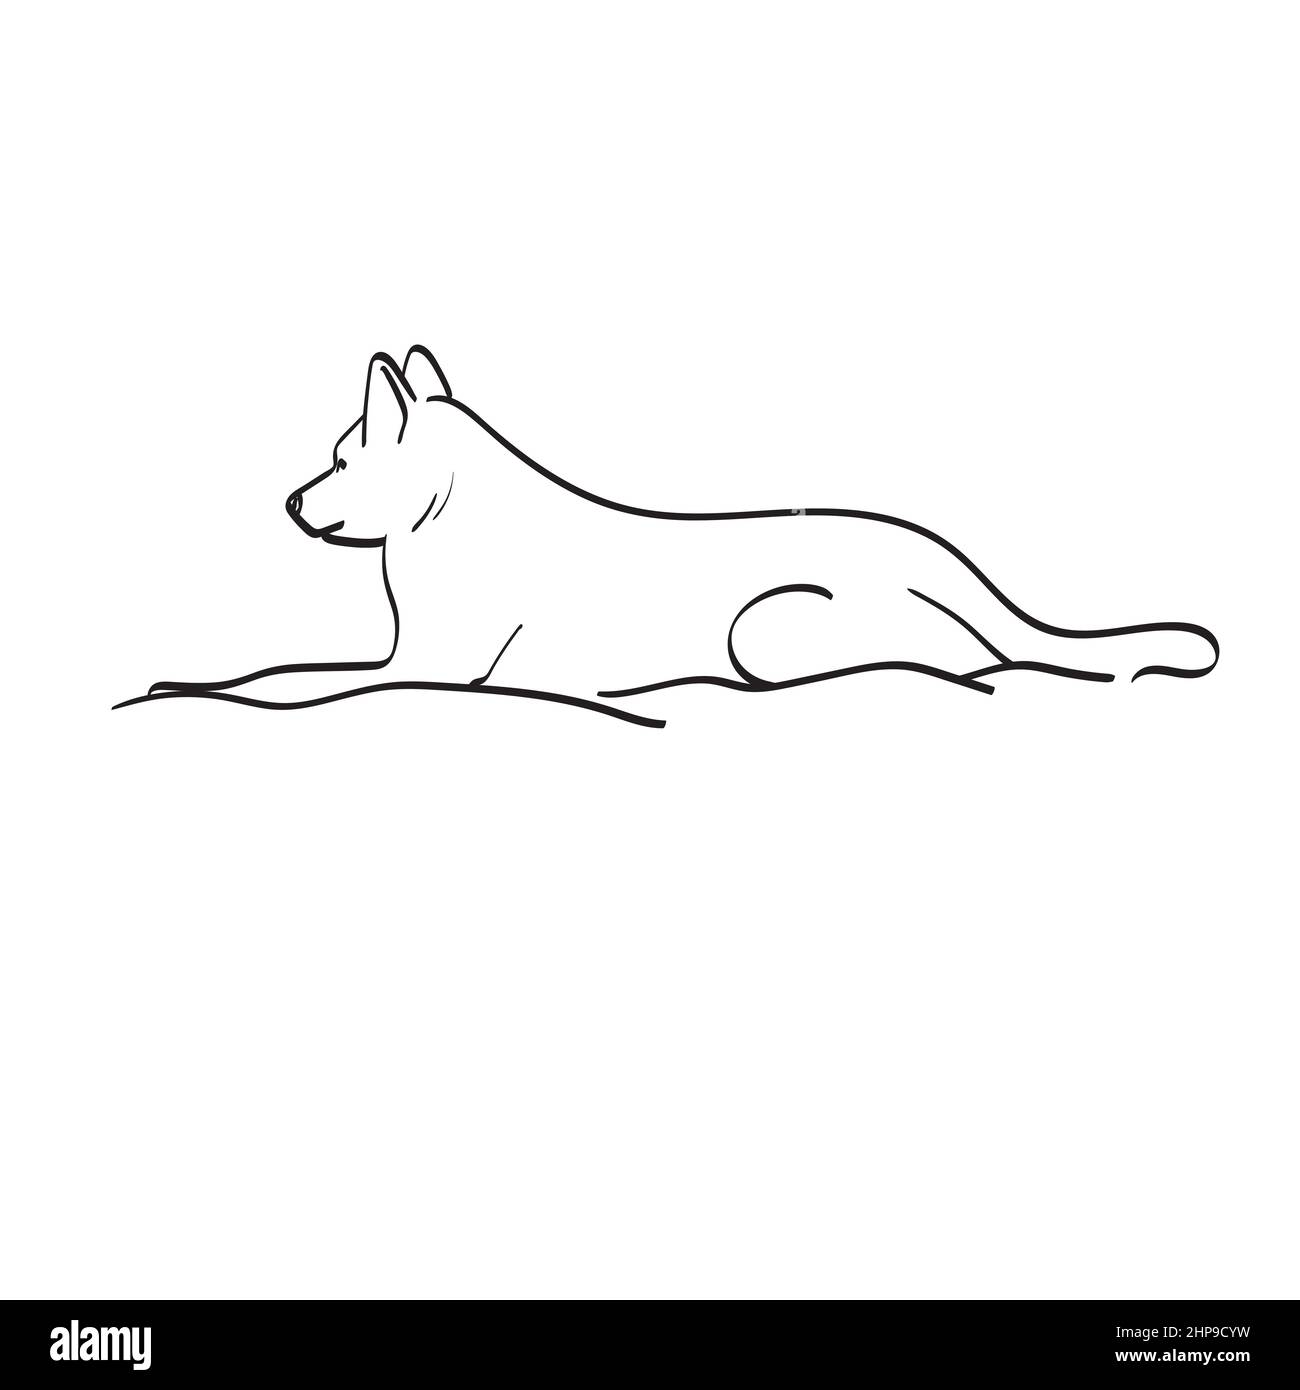 side view dog lying on bed illustration vector hand drawn isolated on white background line art. Stock Vector